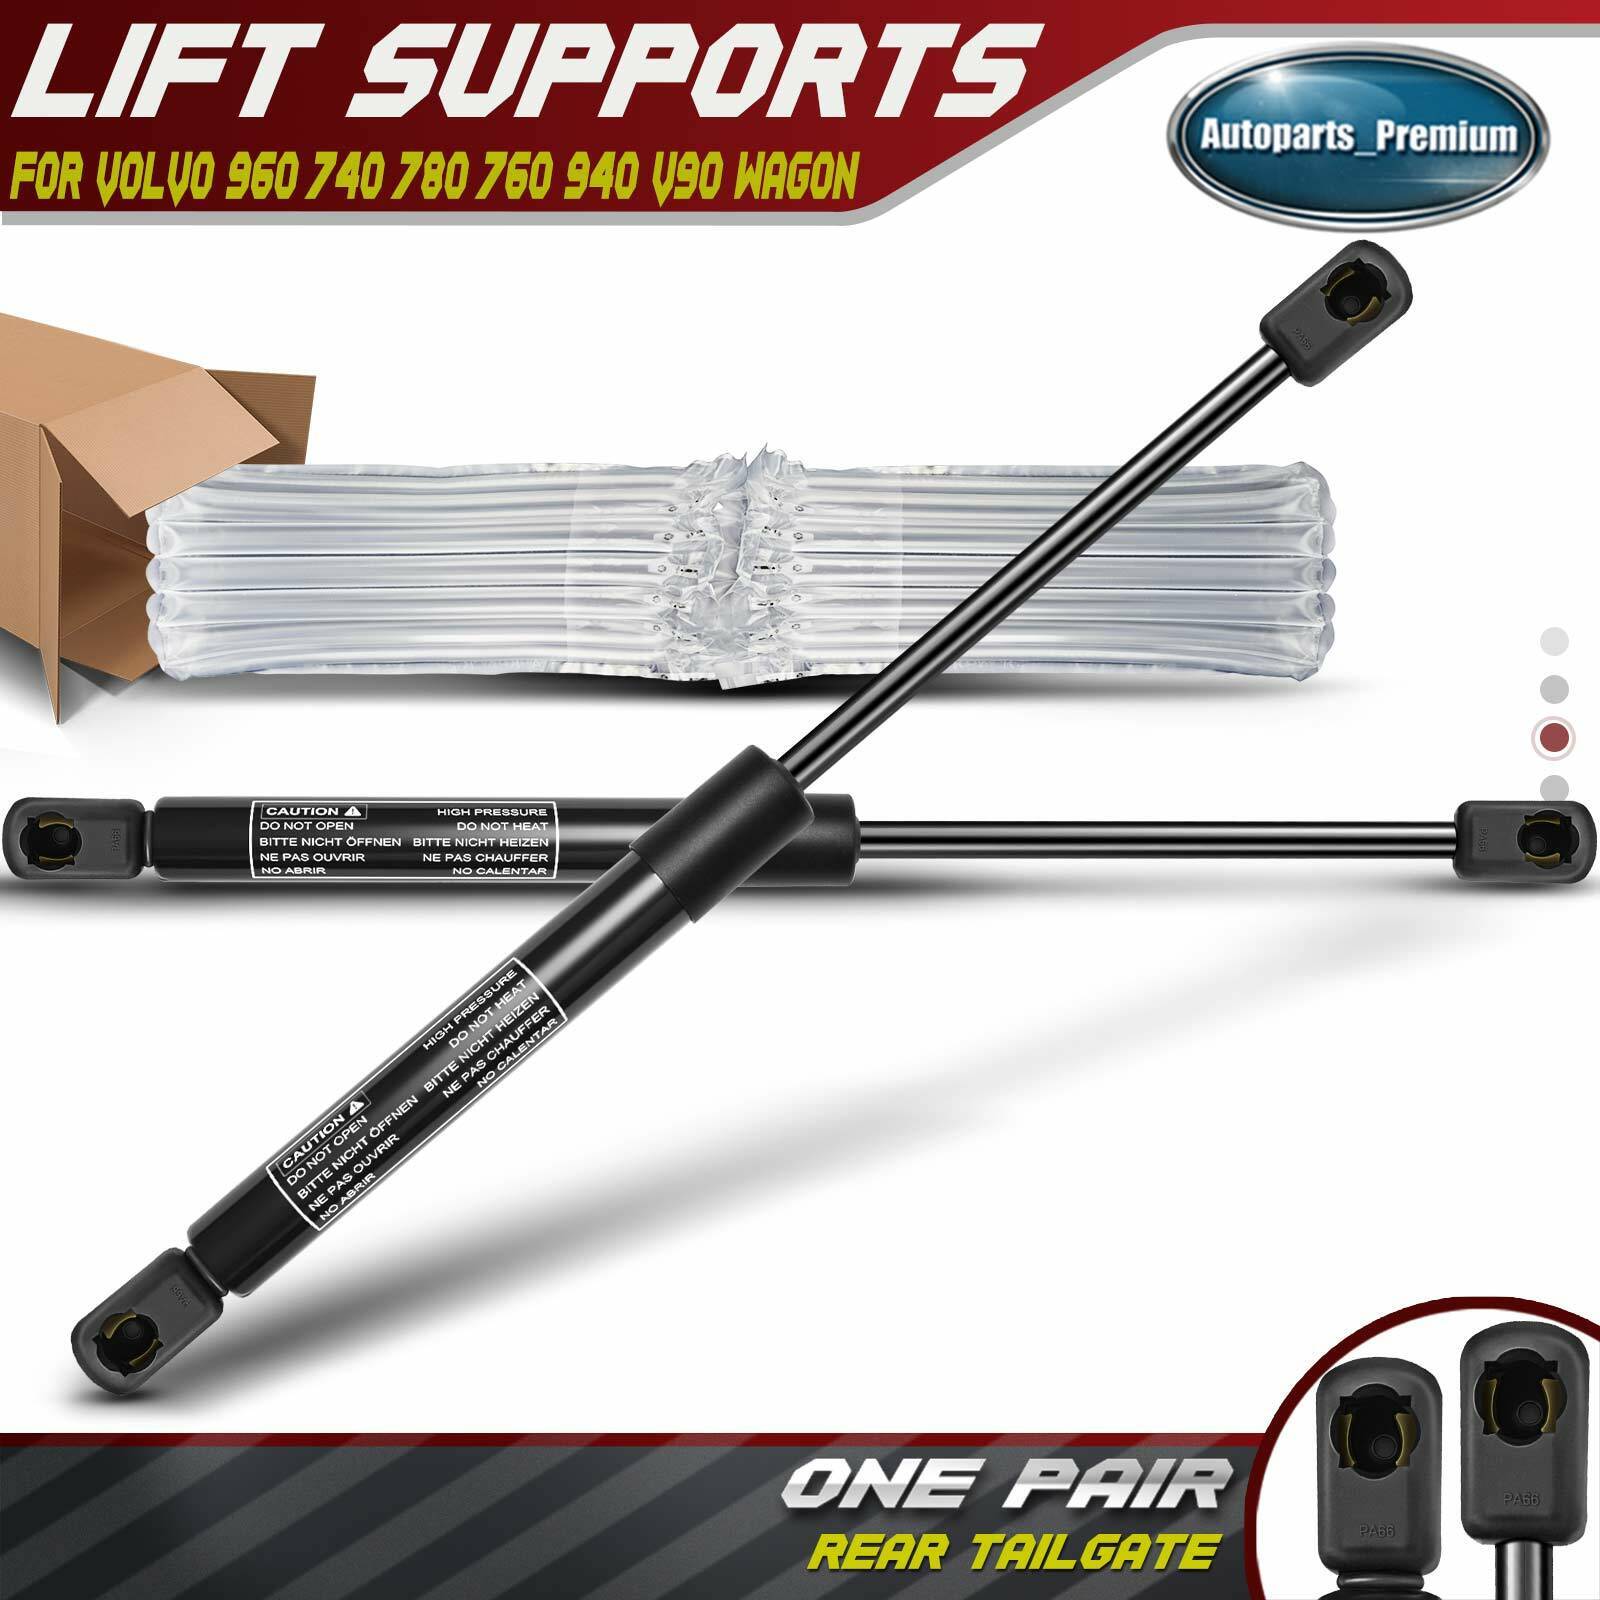 2x Rear Tailgate Lift Supports Shock Struts for Volvo 960 740 760 940 V90 Wagon